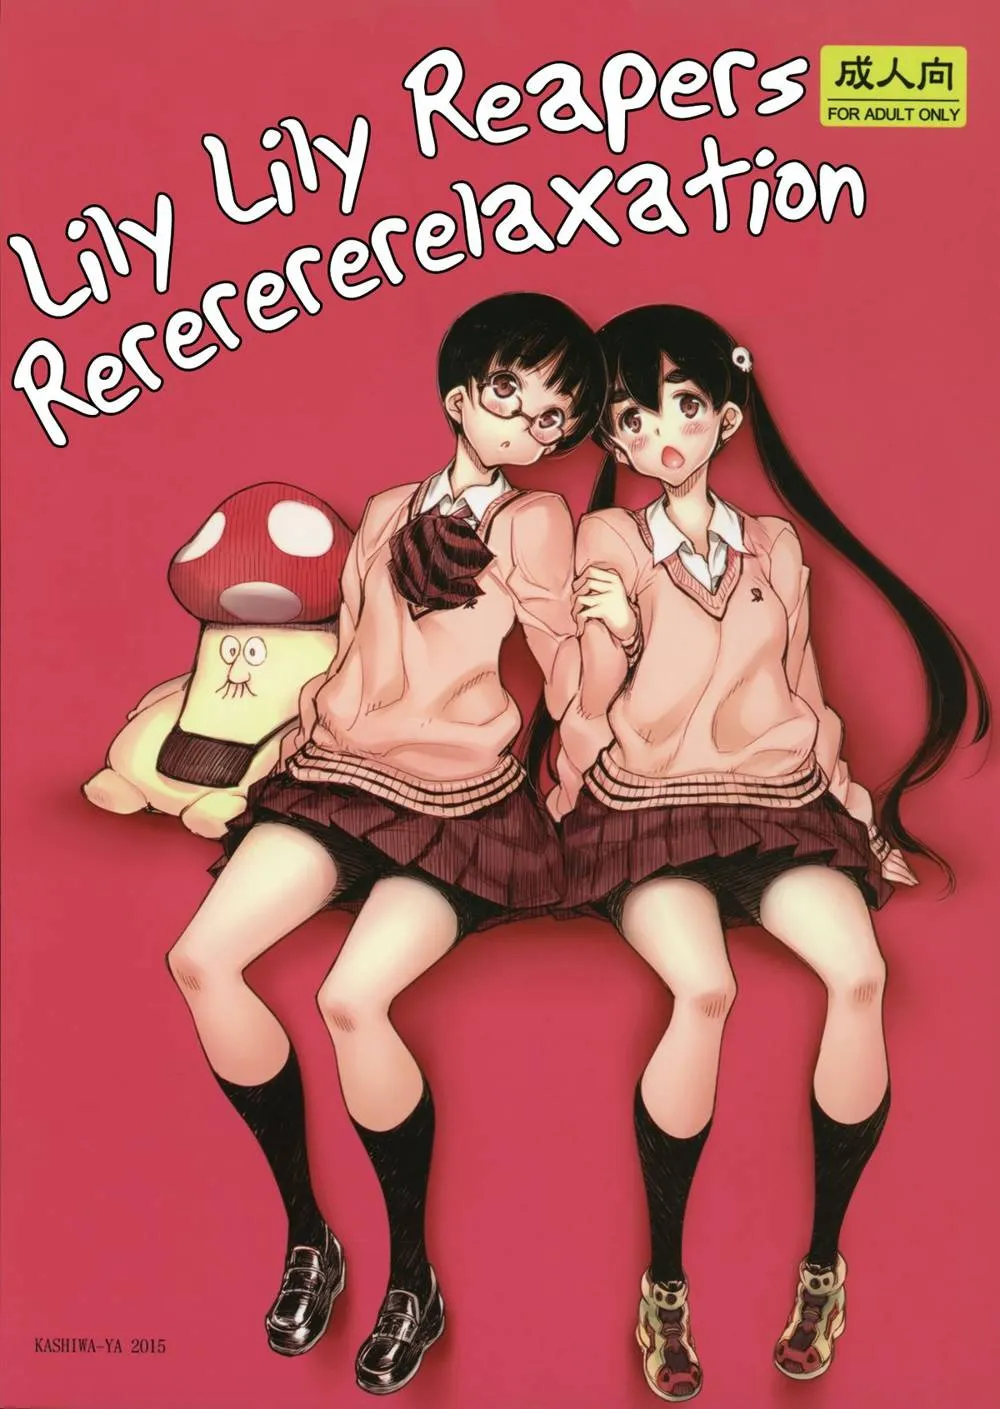 Original,Lily Lily Reapers Rererererelaxation [English][第1页]